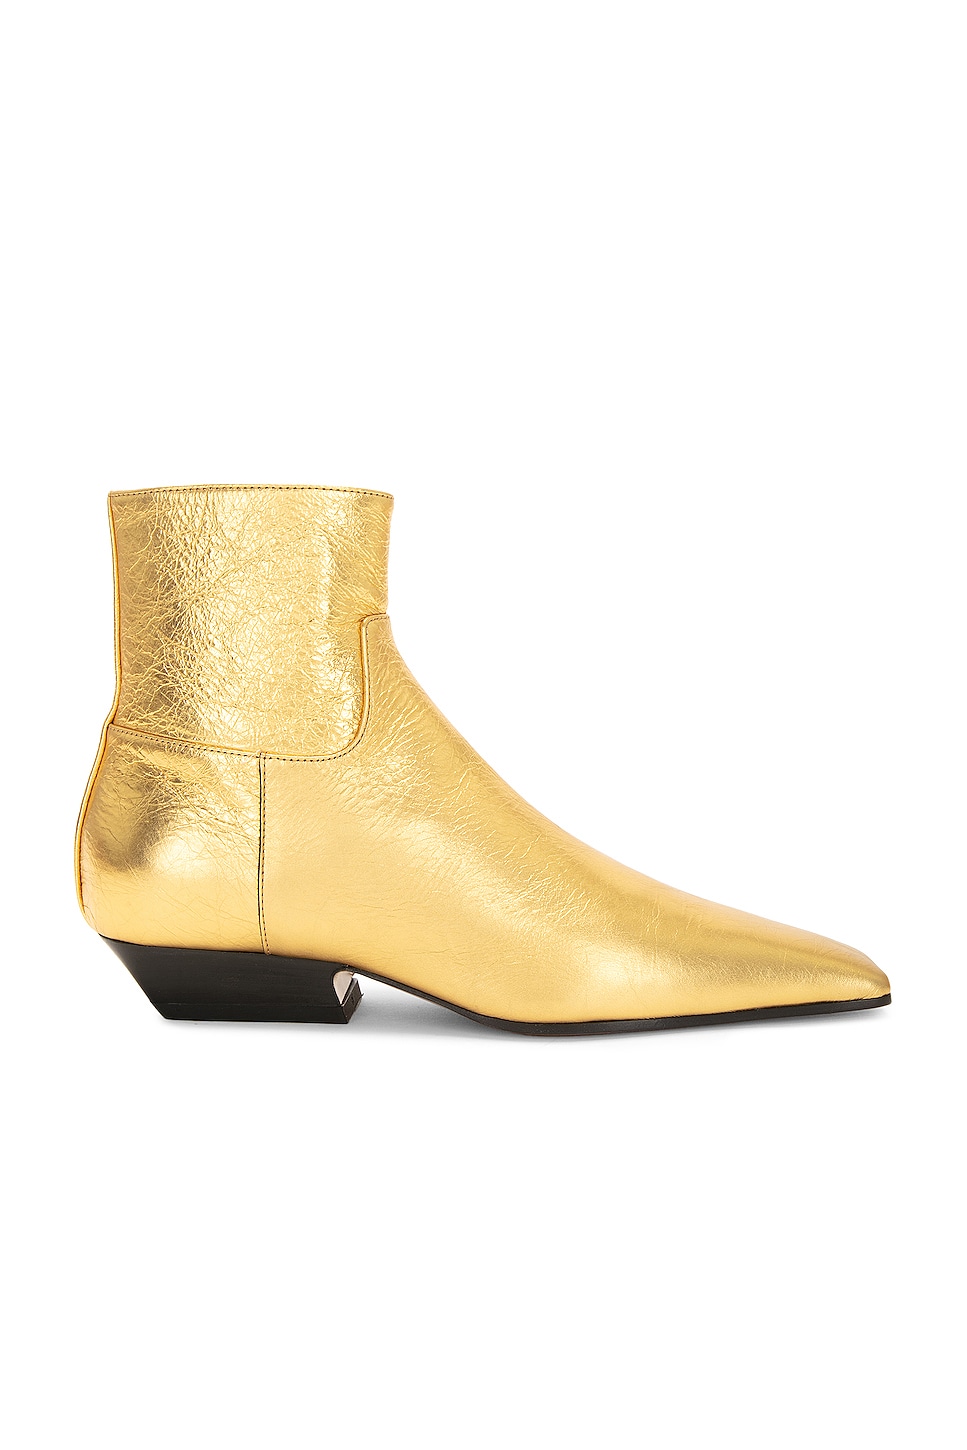 Image 1 of KHAITE Marfa Classic Flat Ankle Boot in Gold